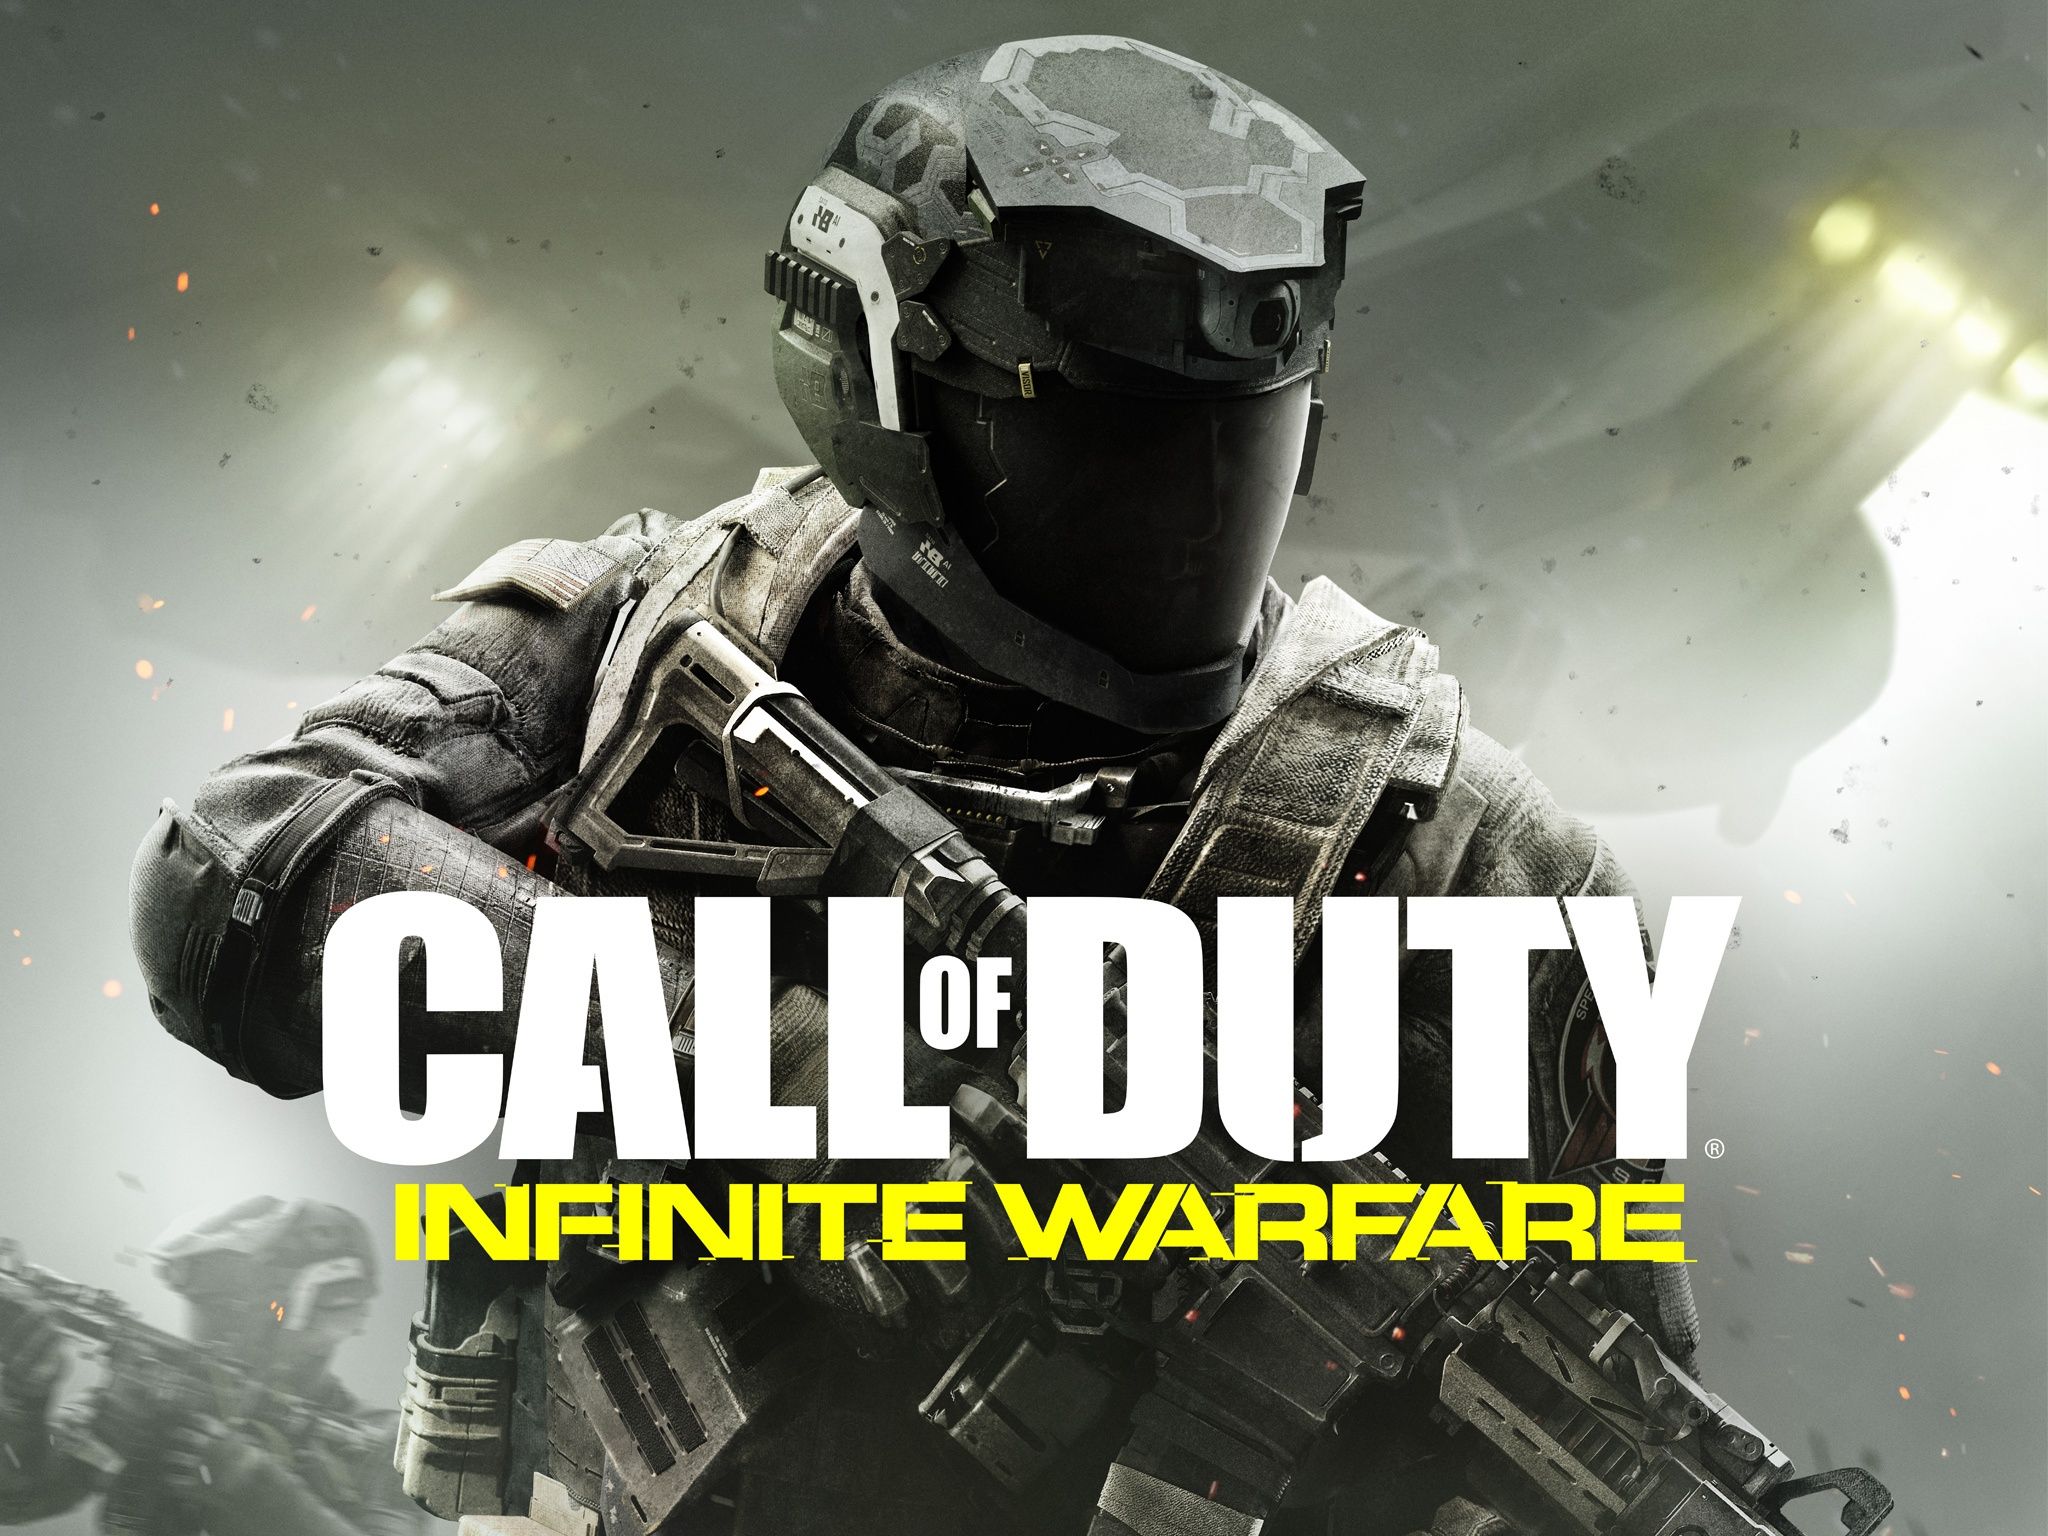 Call of Duty Infinite Warfare Game Wallpaper in jpg format for free download